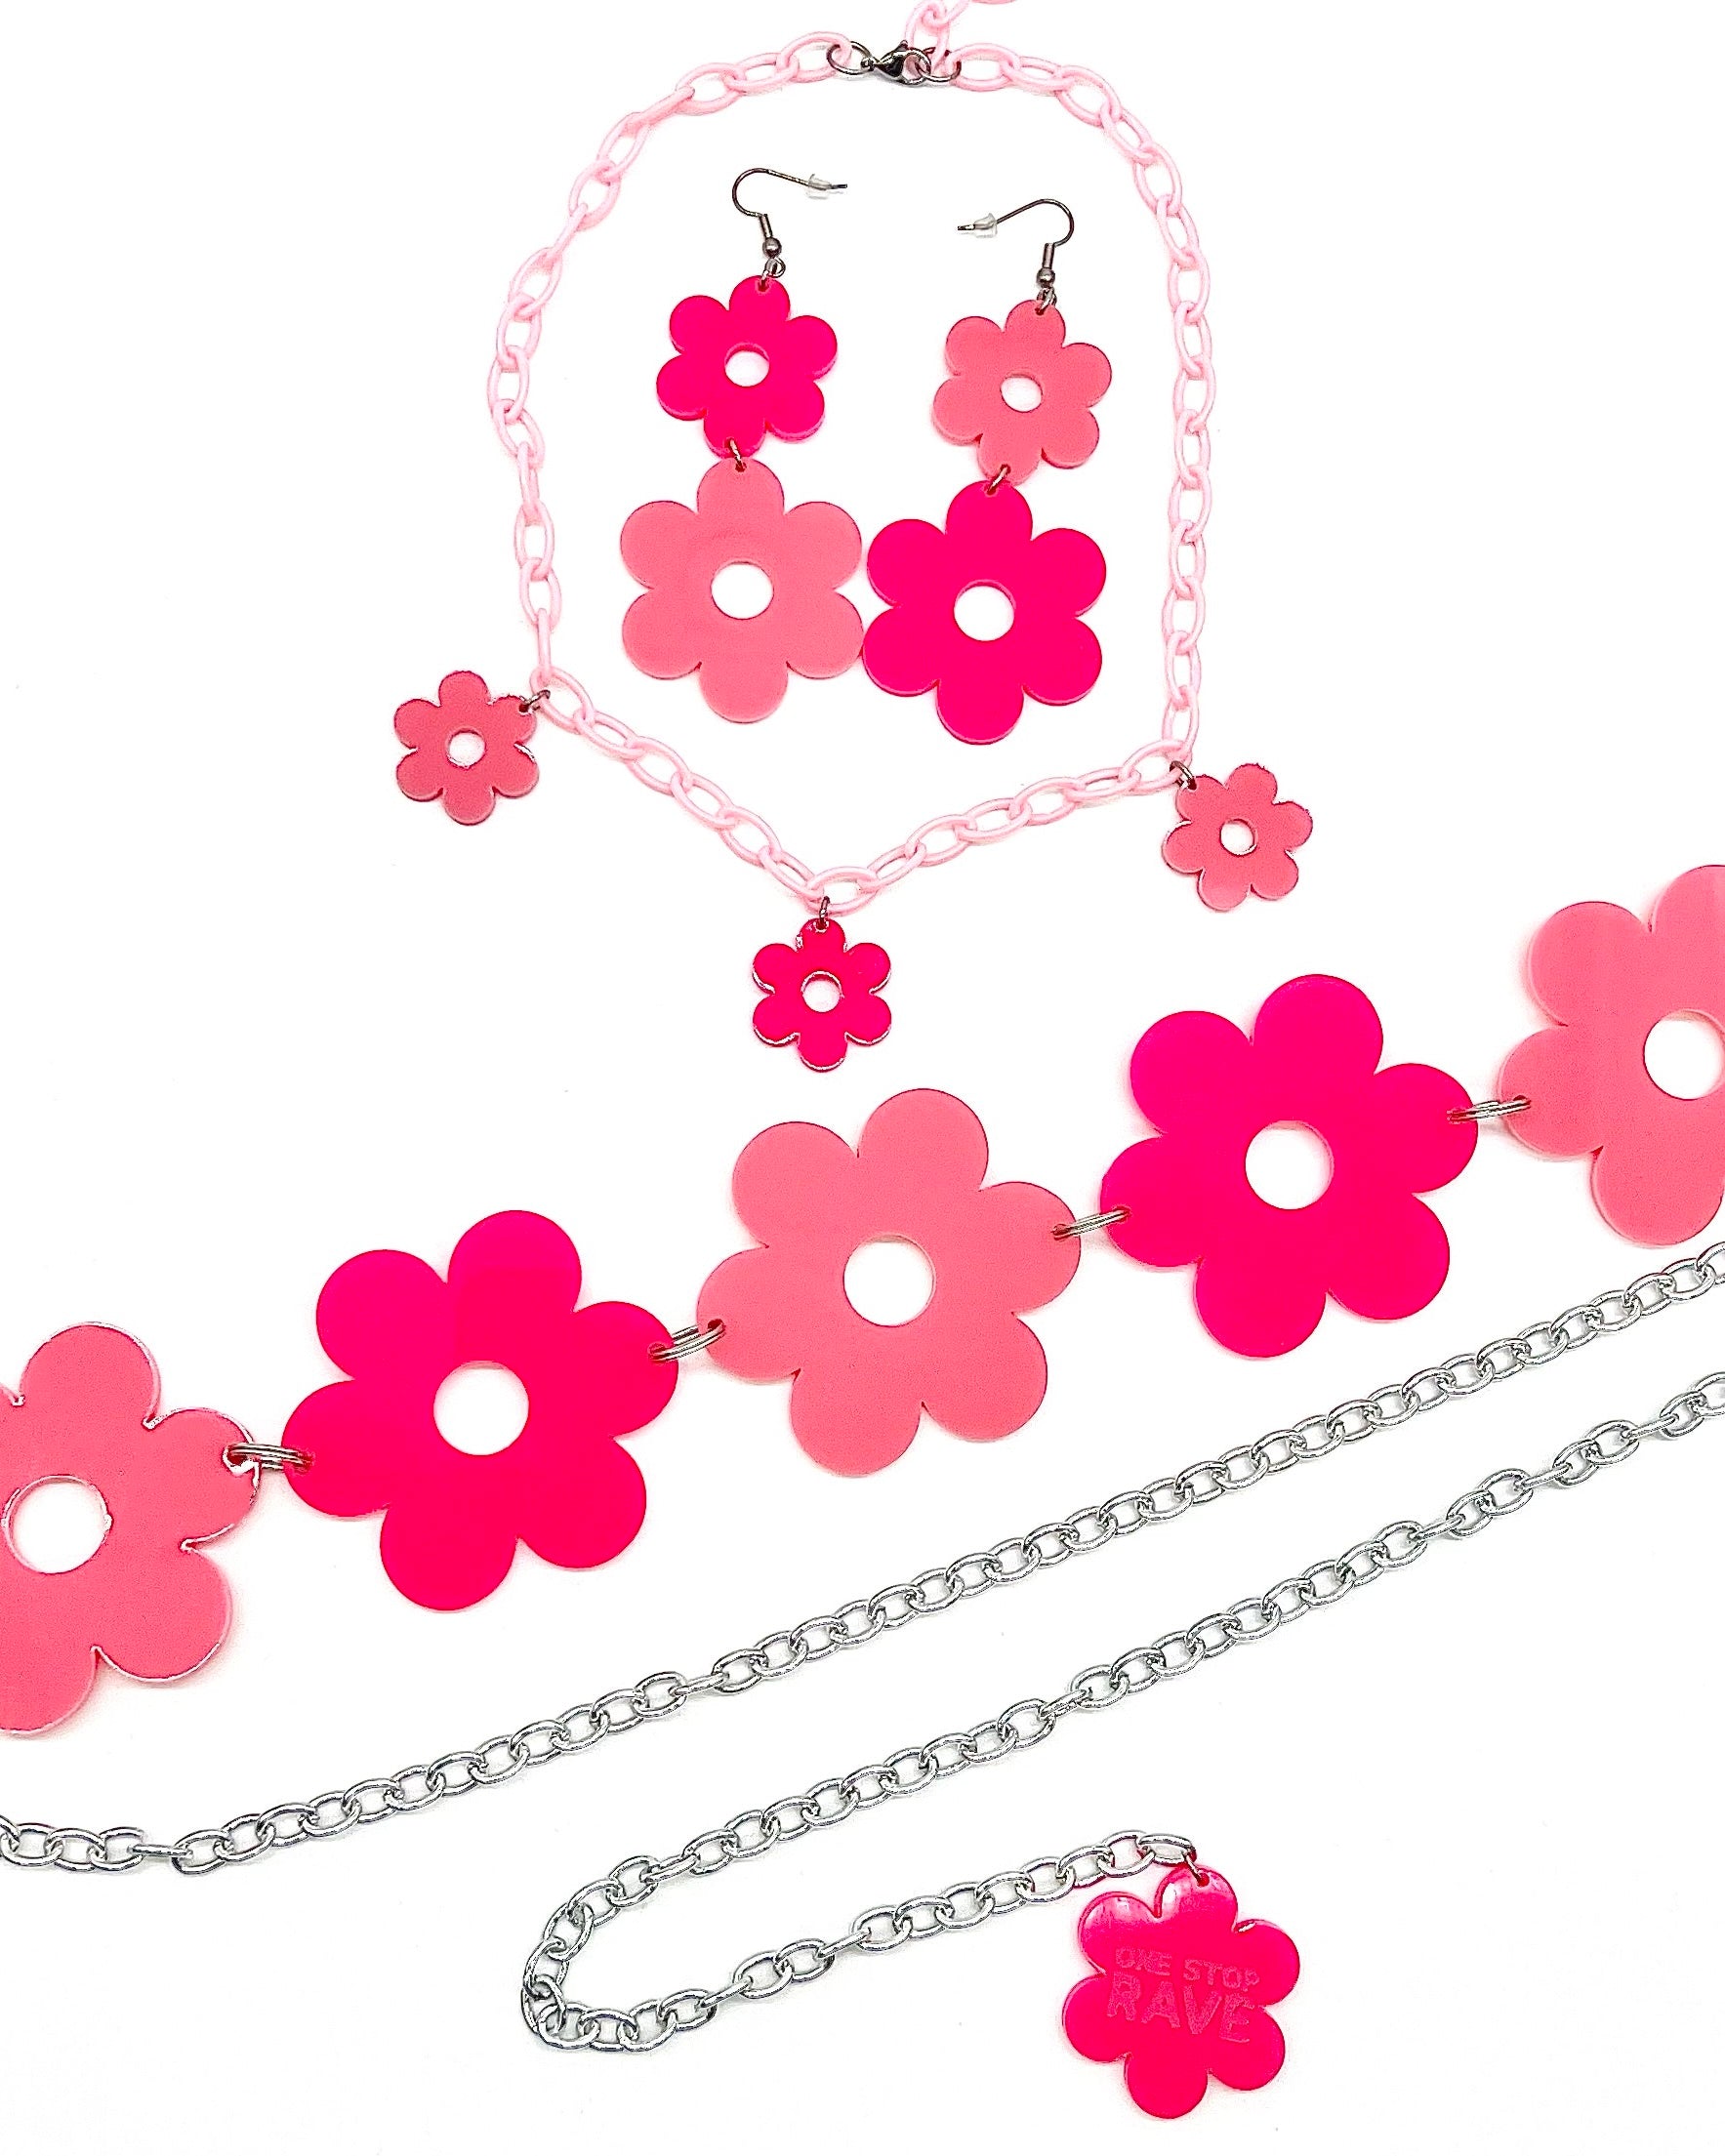 The matching Flower Power Pink set which includes the earrings, choker, and belt.